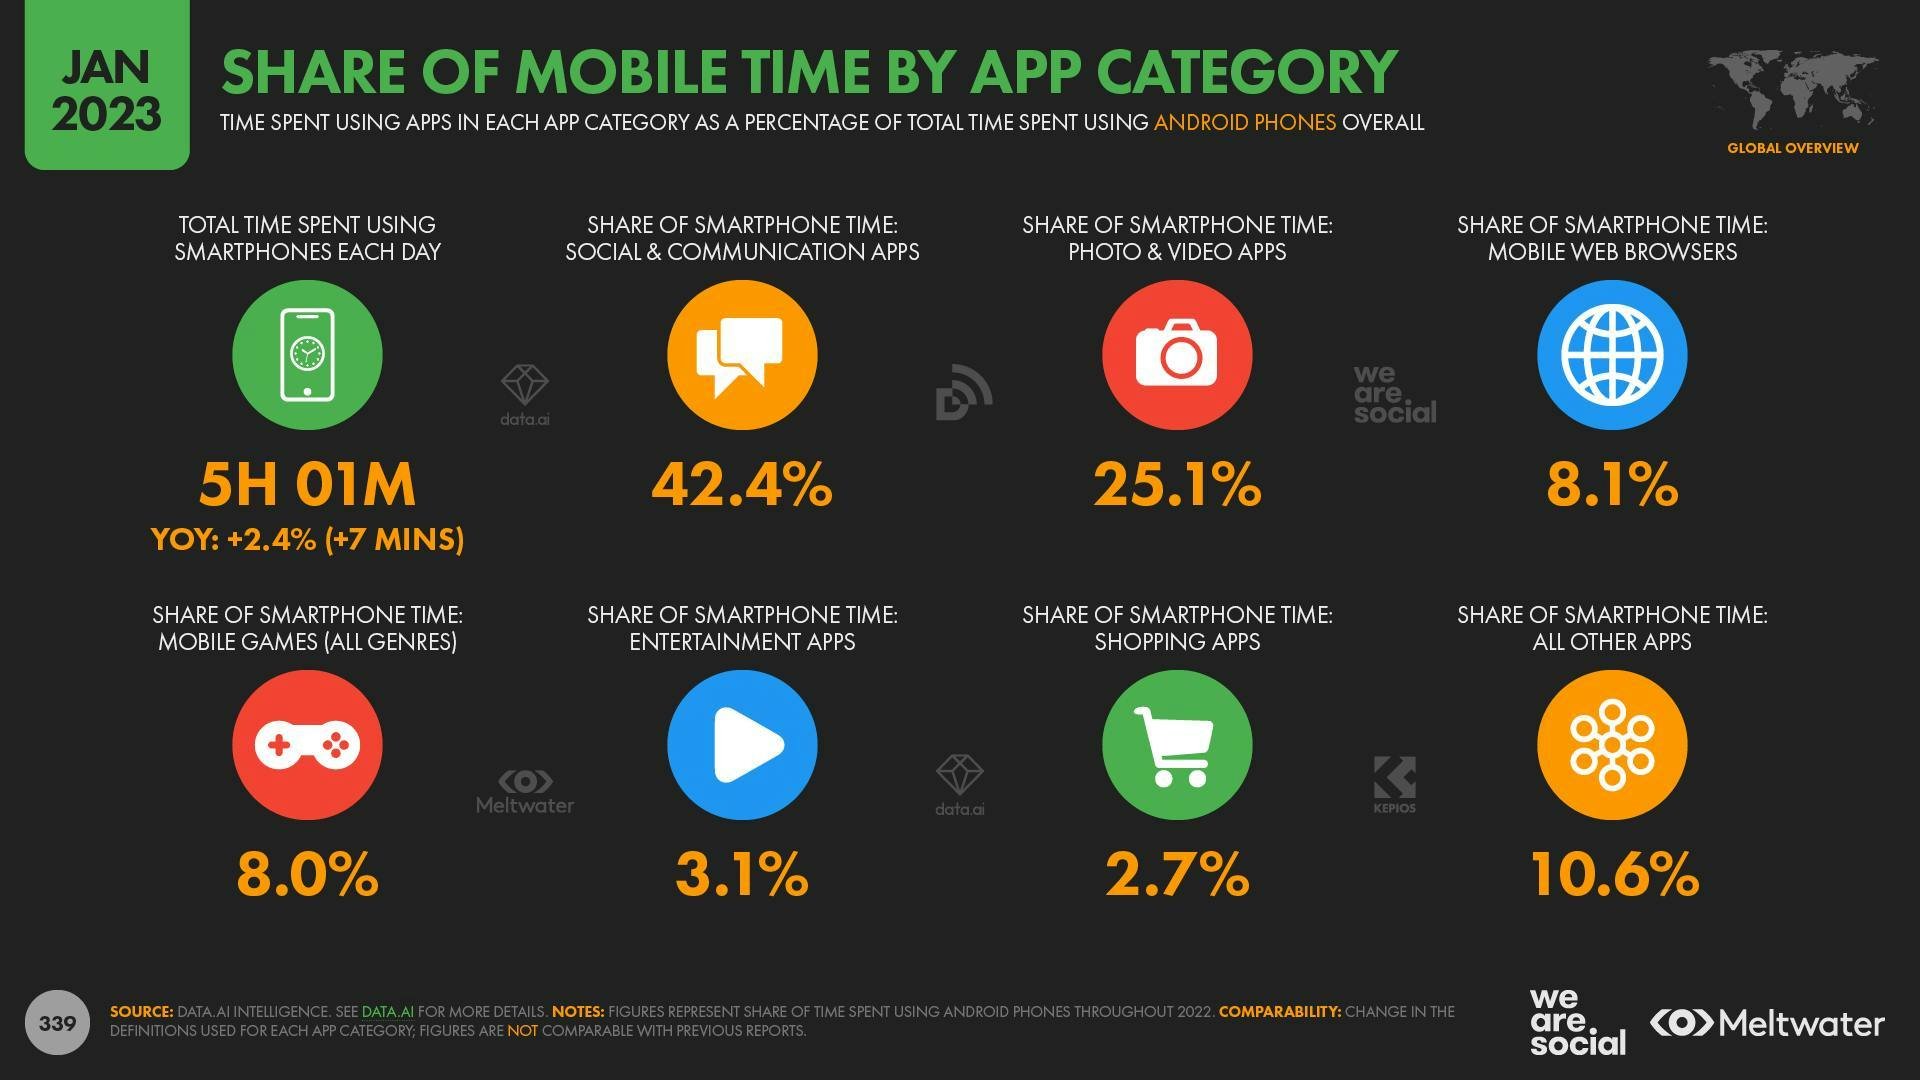 share of mobile time by app category 2023